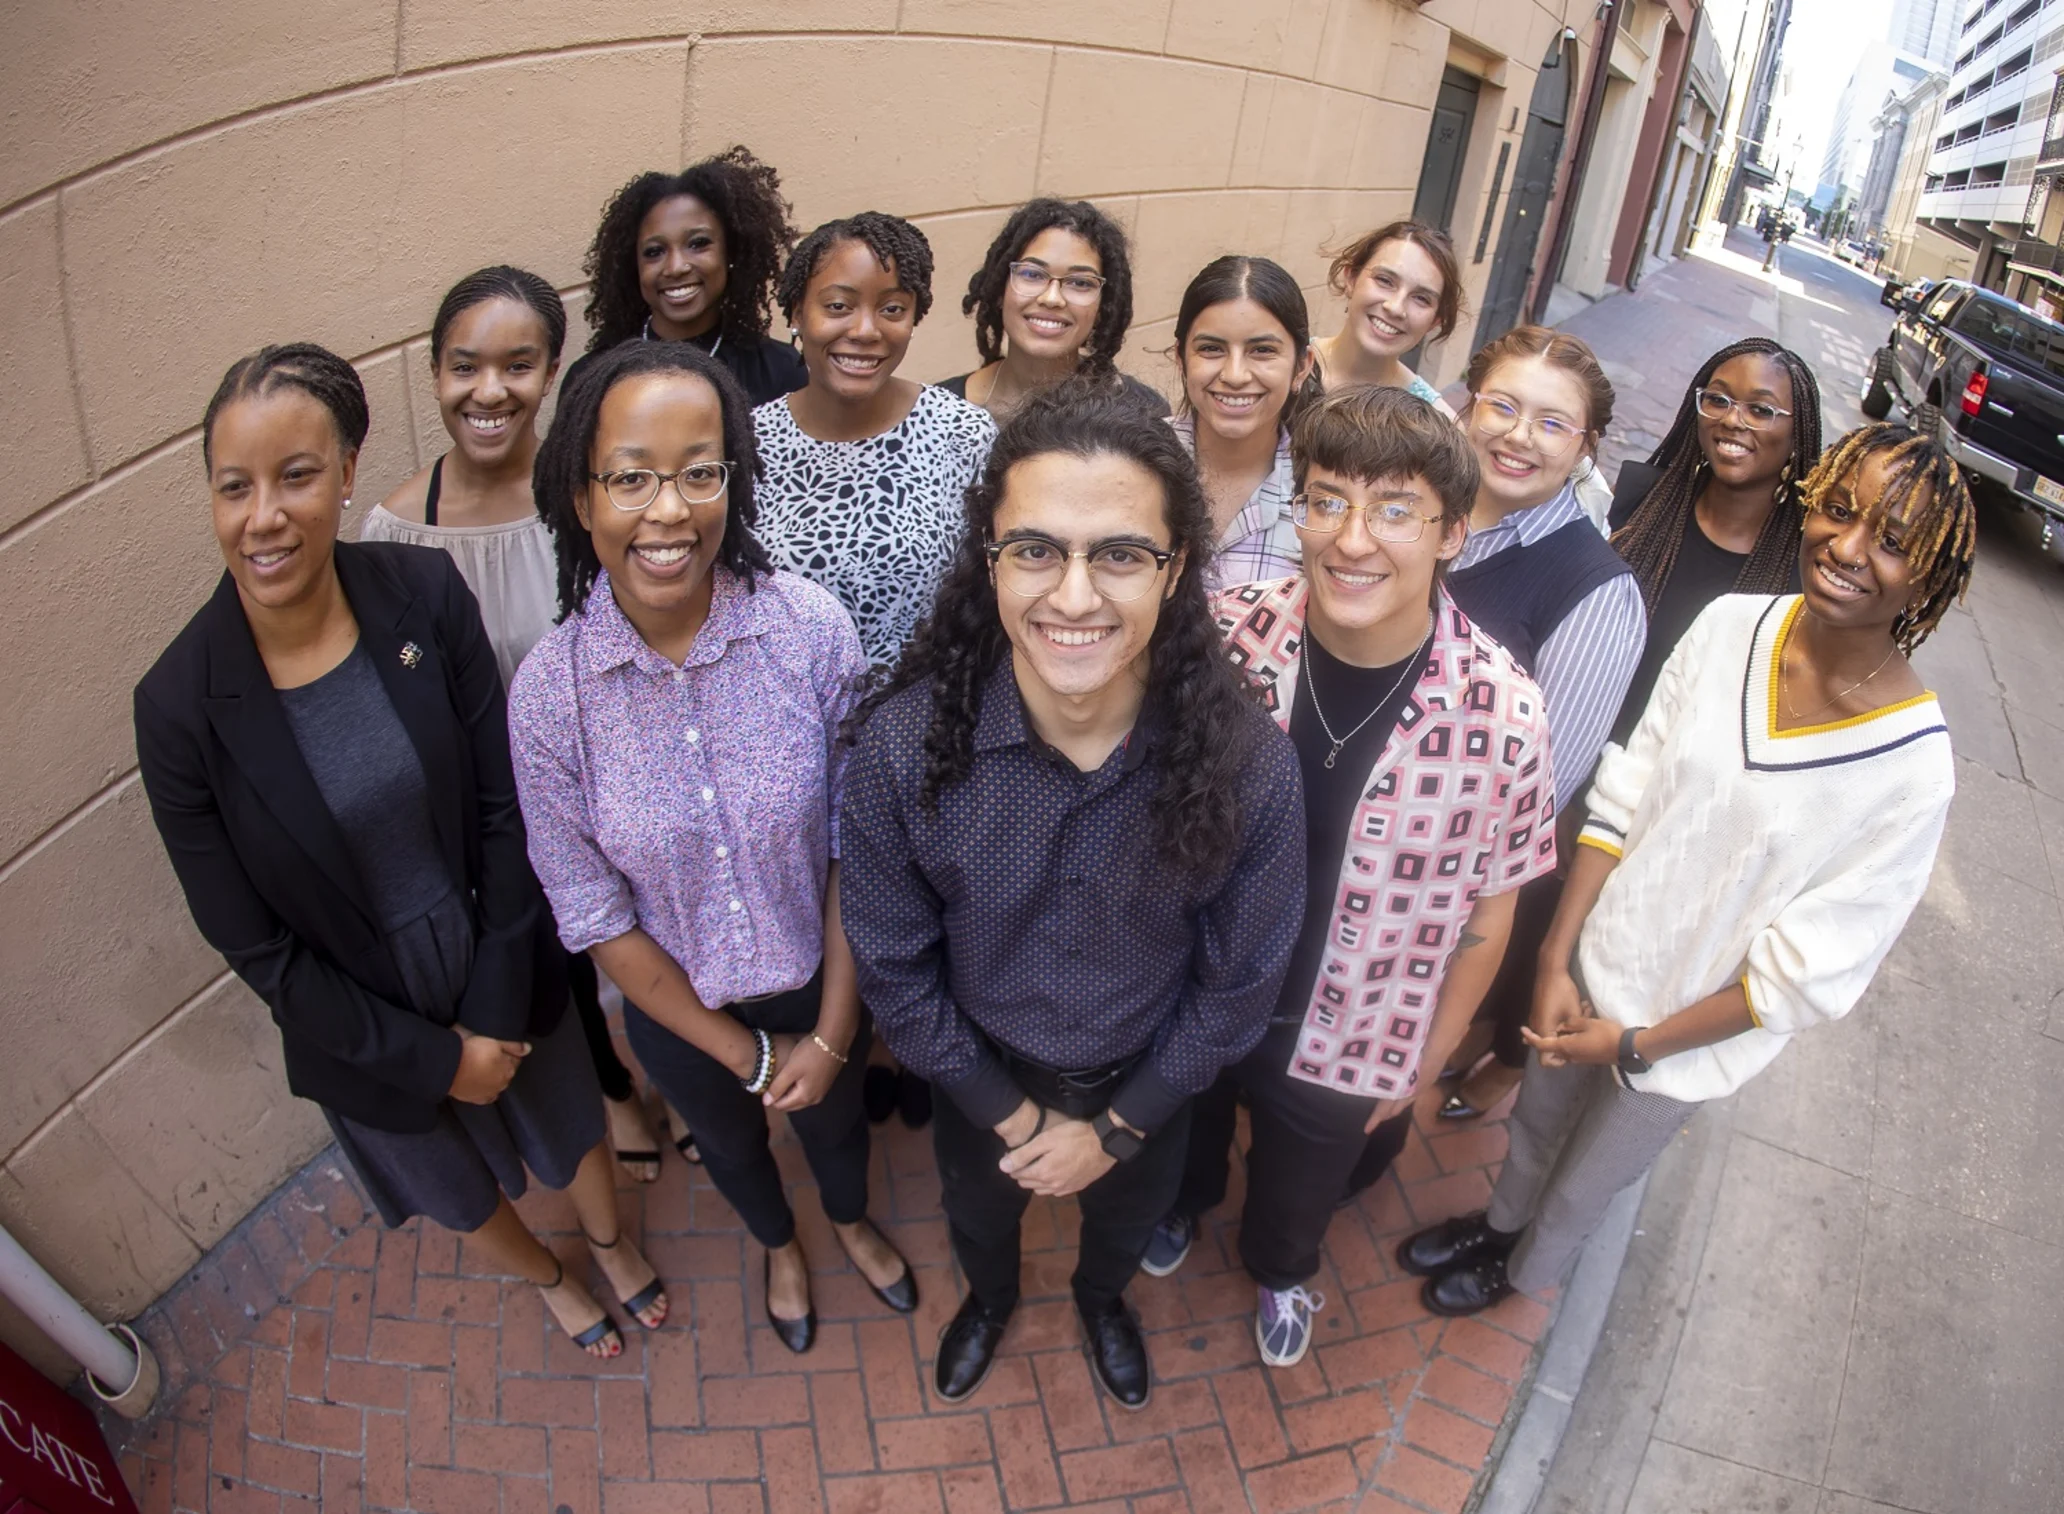 A diverse group of students smile up at the camera on a brick sidewalk in downtown New Orleans, Louisiana.